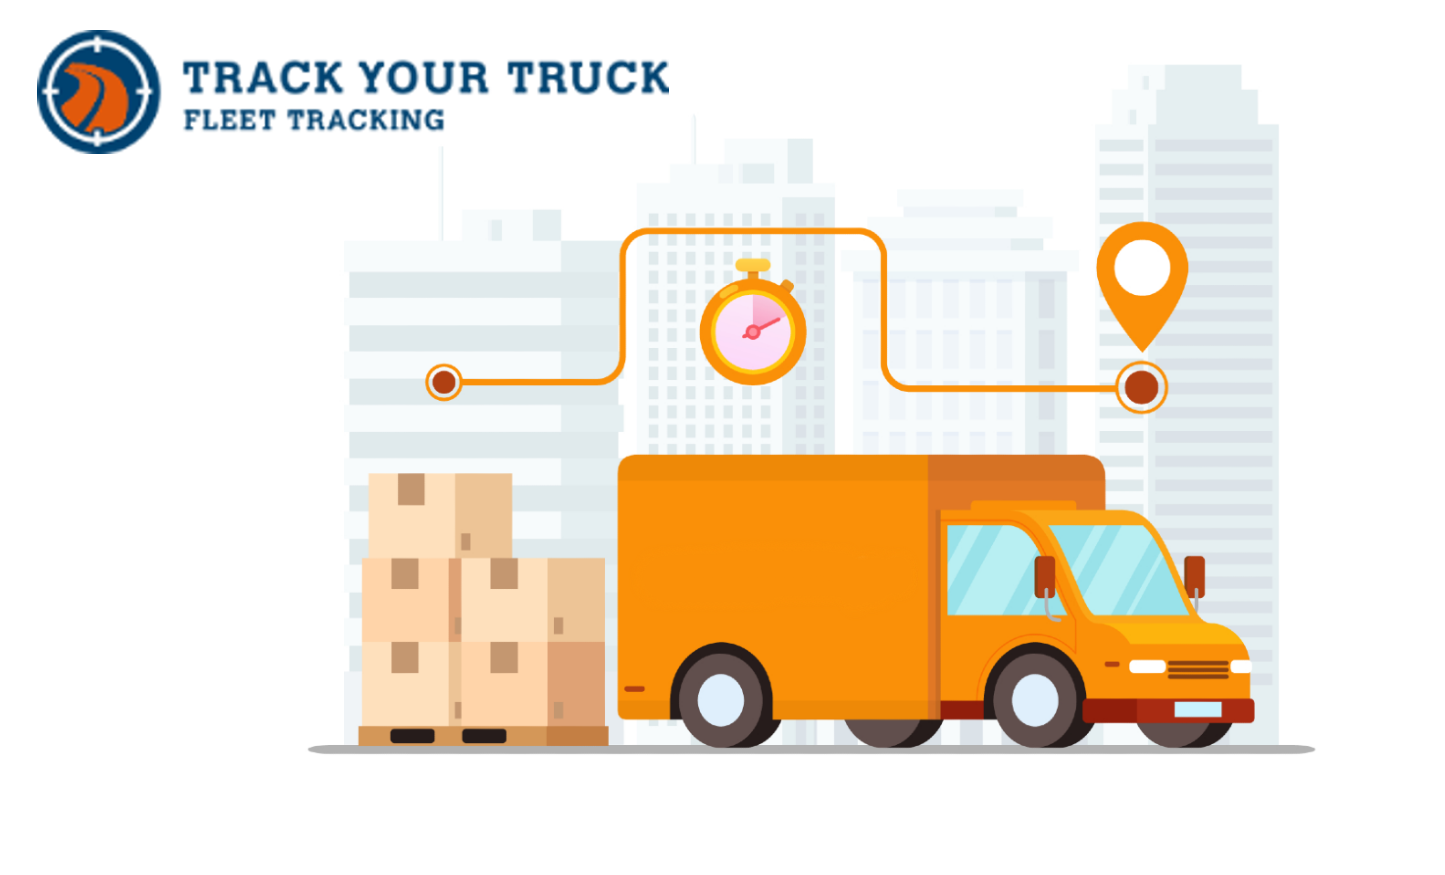 Track Your Truck Review: Plans, Prices, Features, and More!